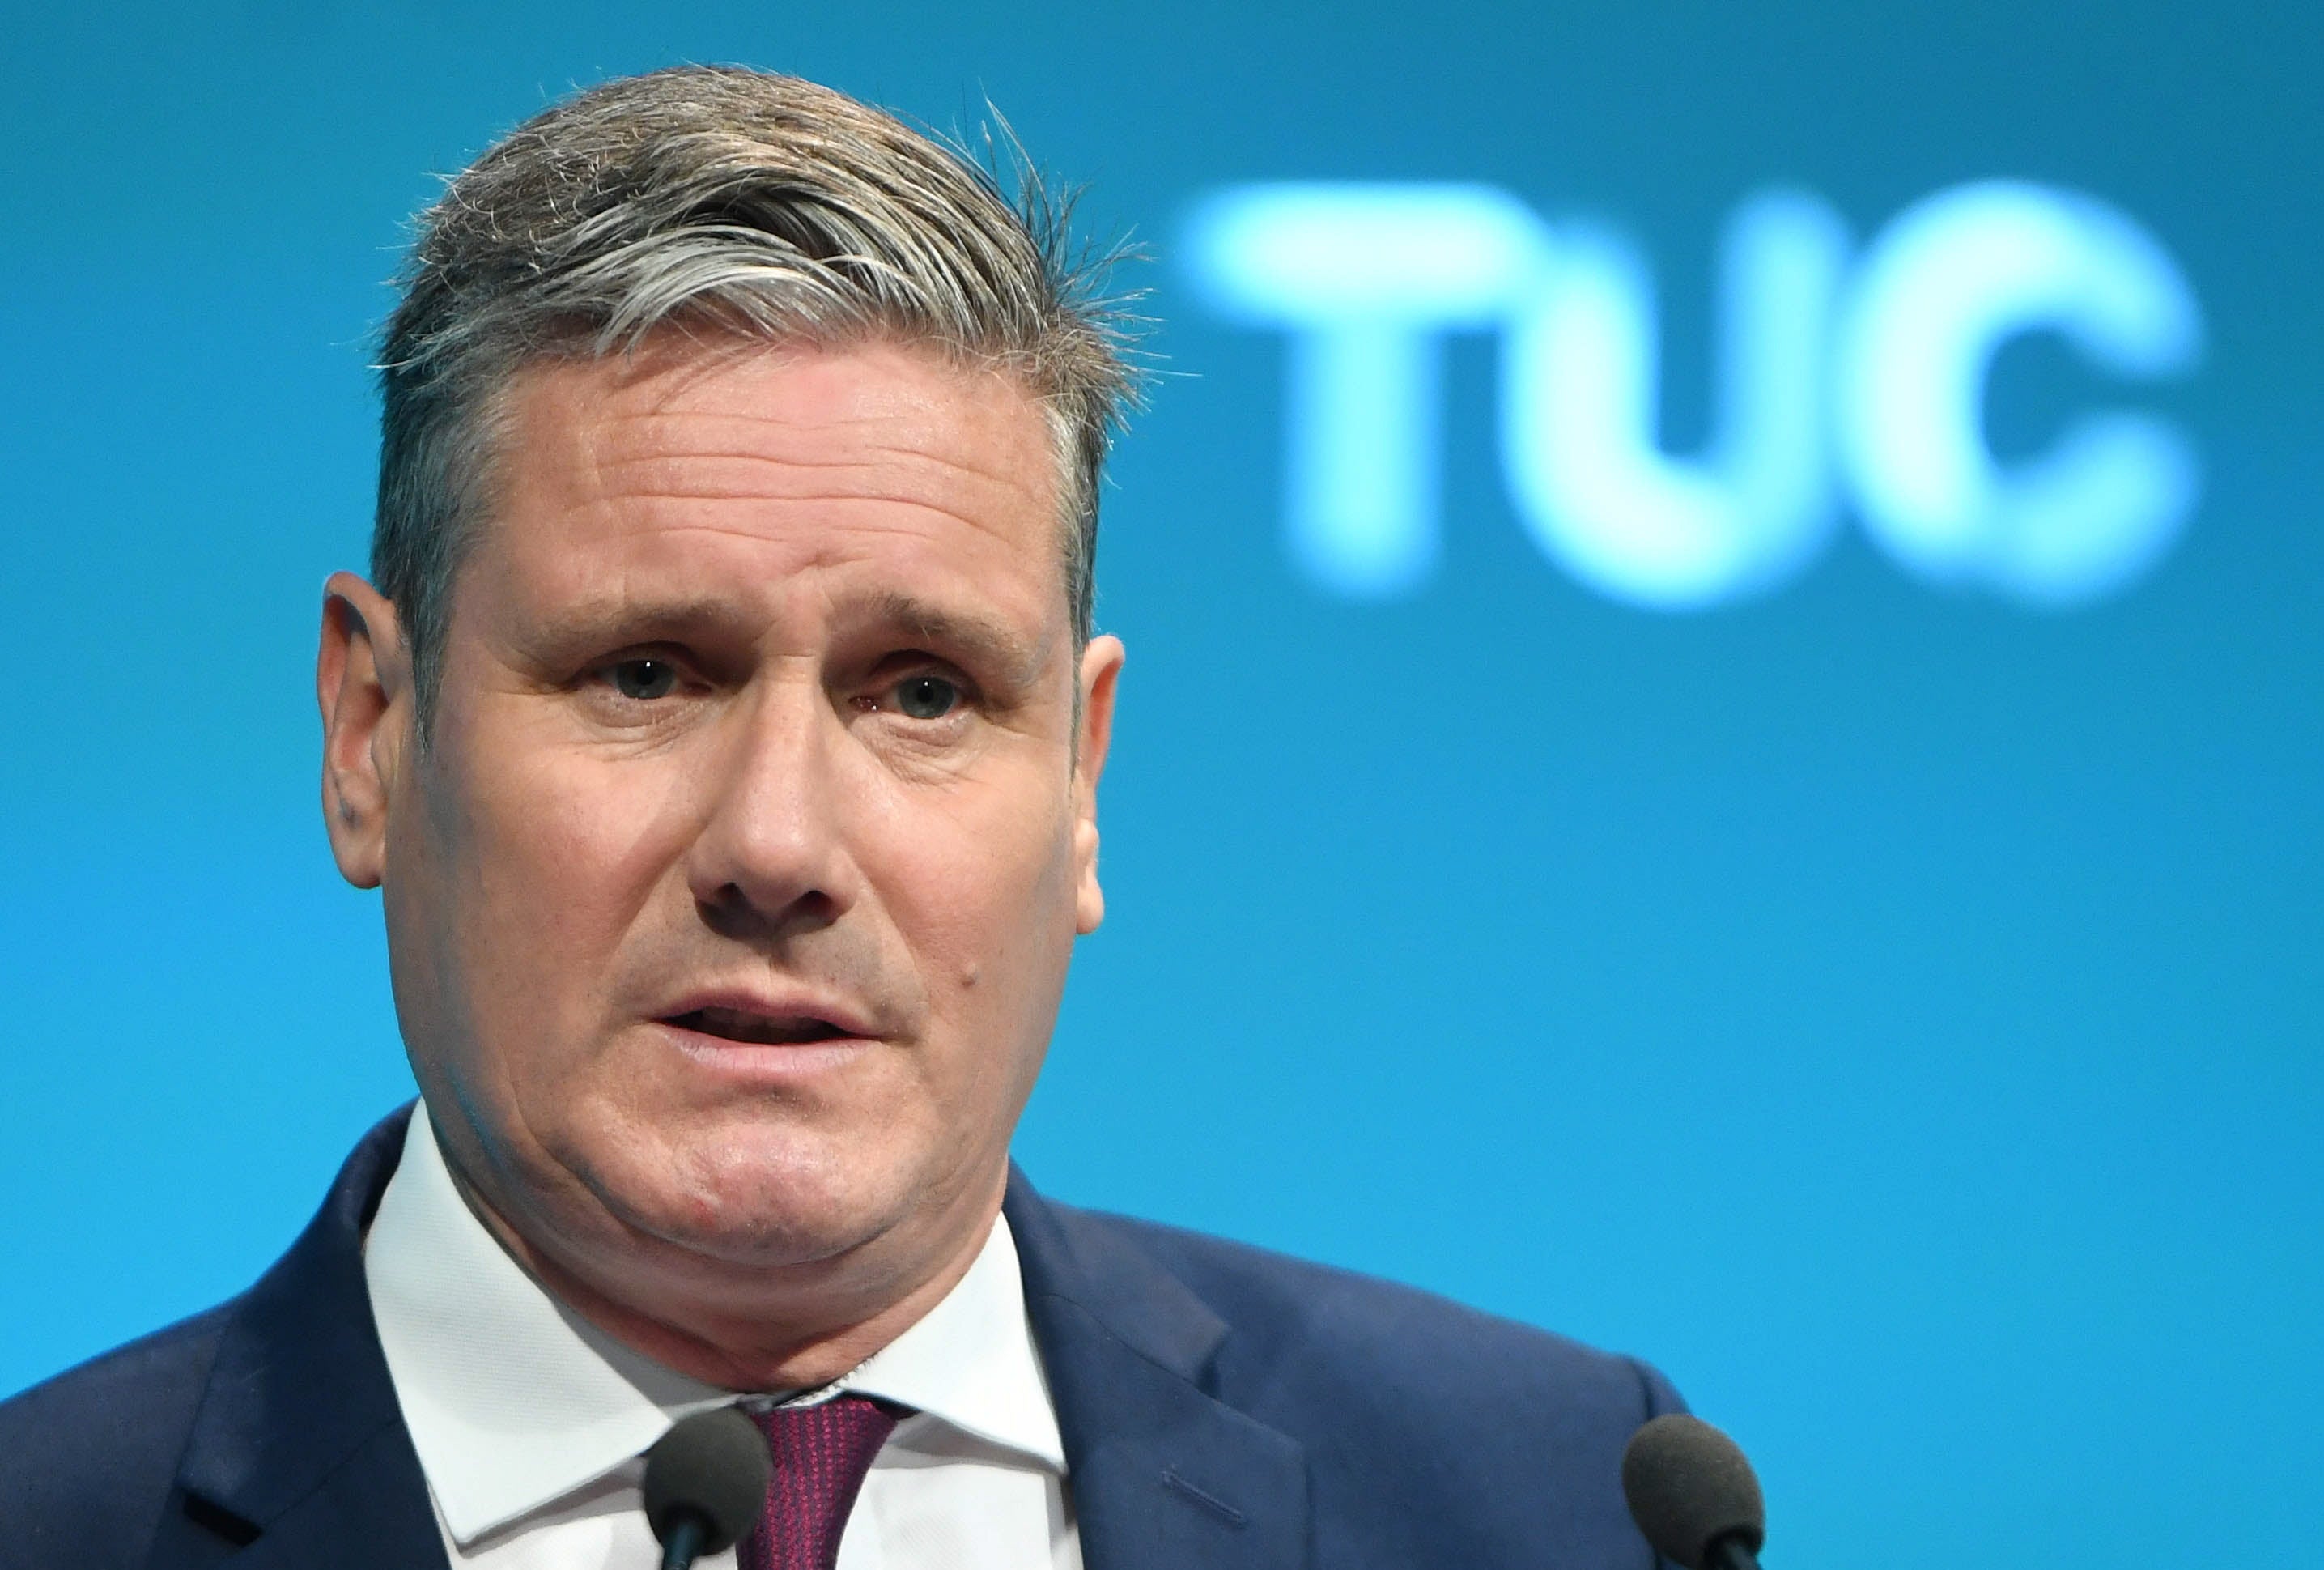 Keir Starmer gives the TUC the same message his predecessor did 28 years ago